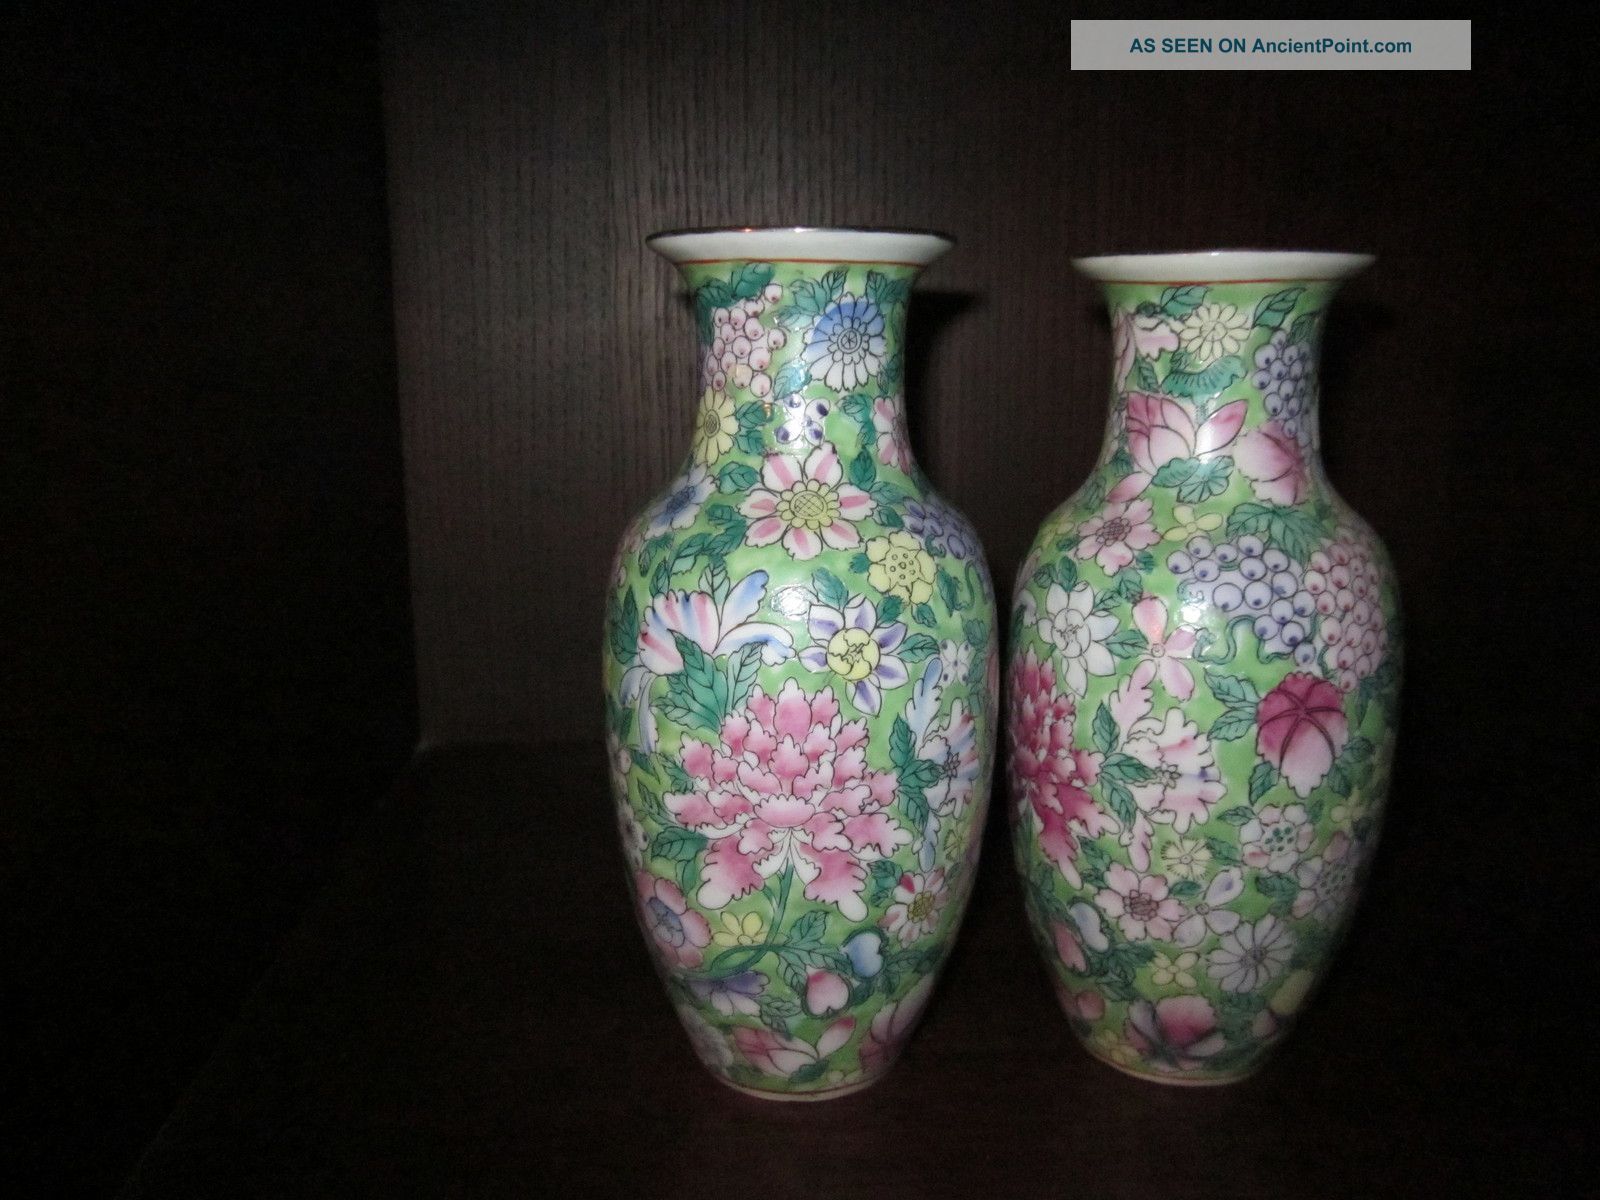 A Fabulous Pair Of Chinese Vases With Peonies And Other Lovely Flowers. Cloisonne photo